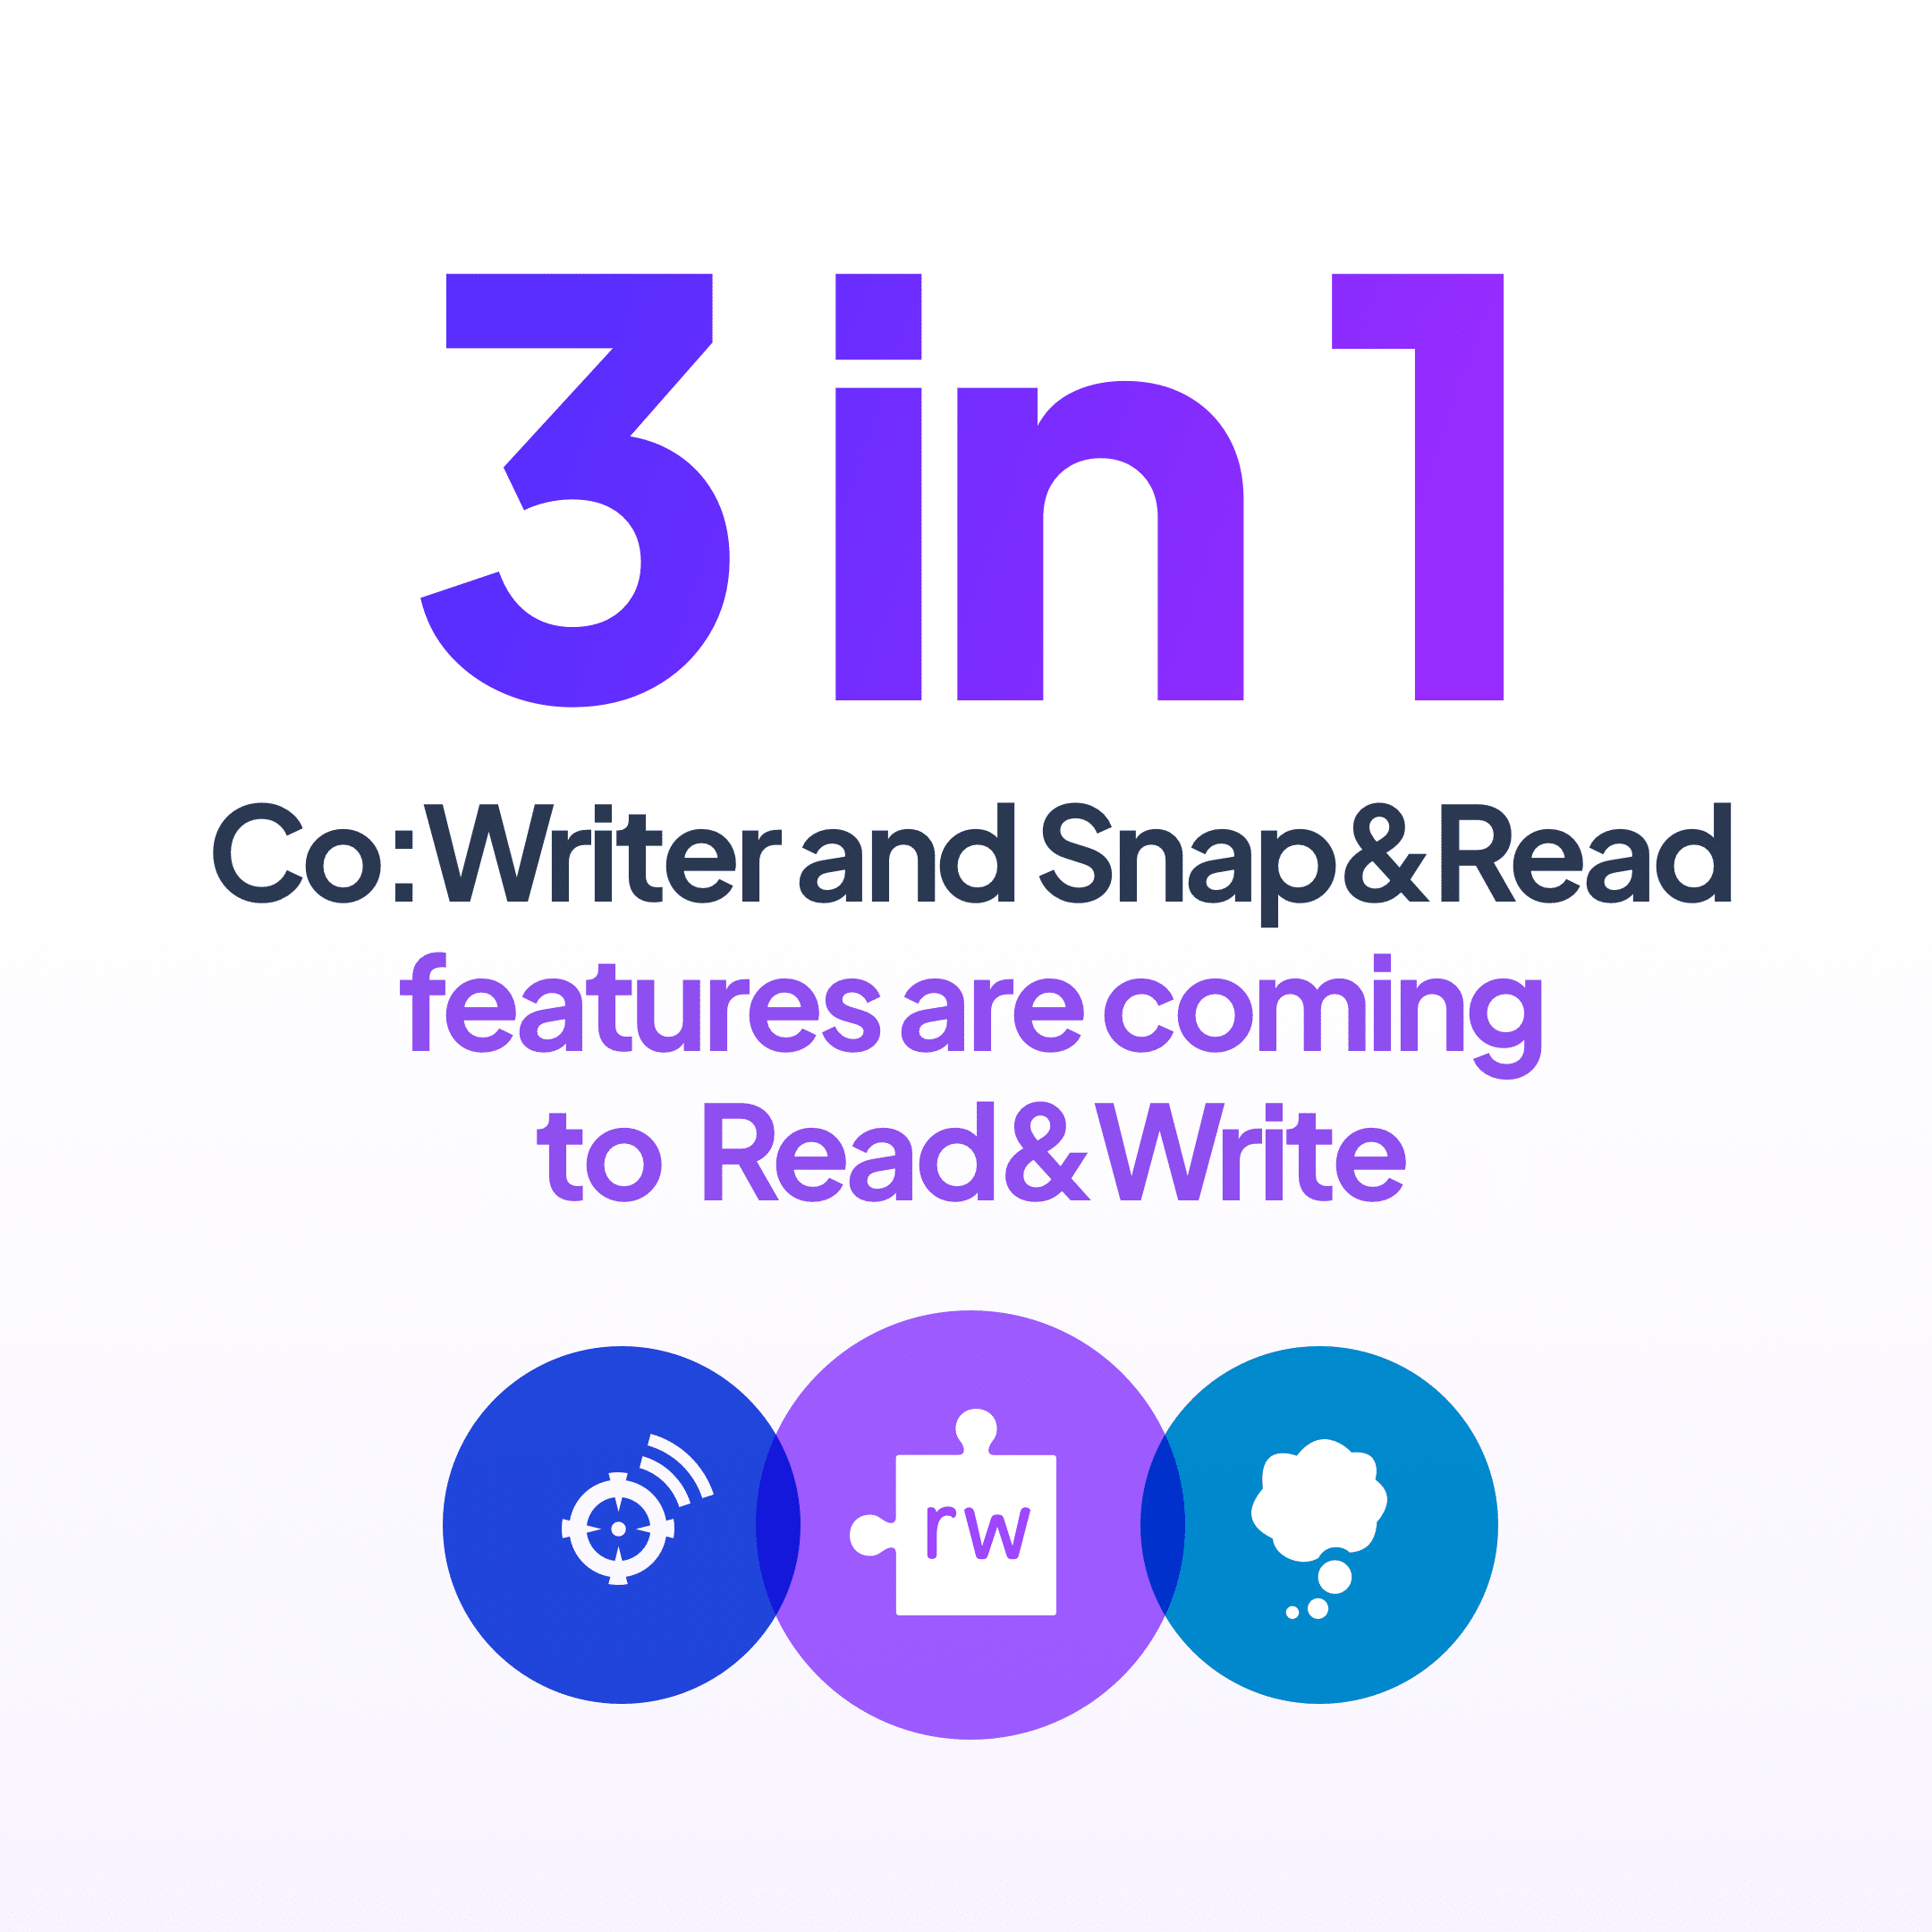 3 in 1 Co:Writer and Snap&Read fatures are coming to Read&Write